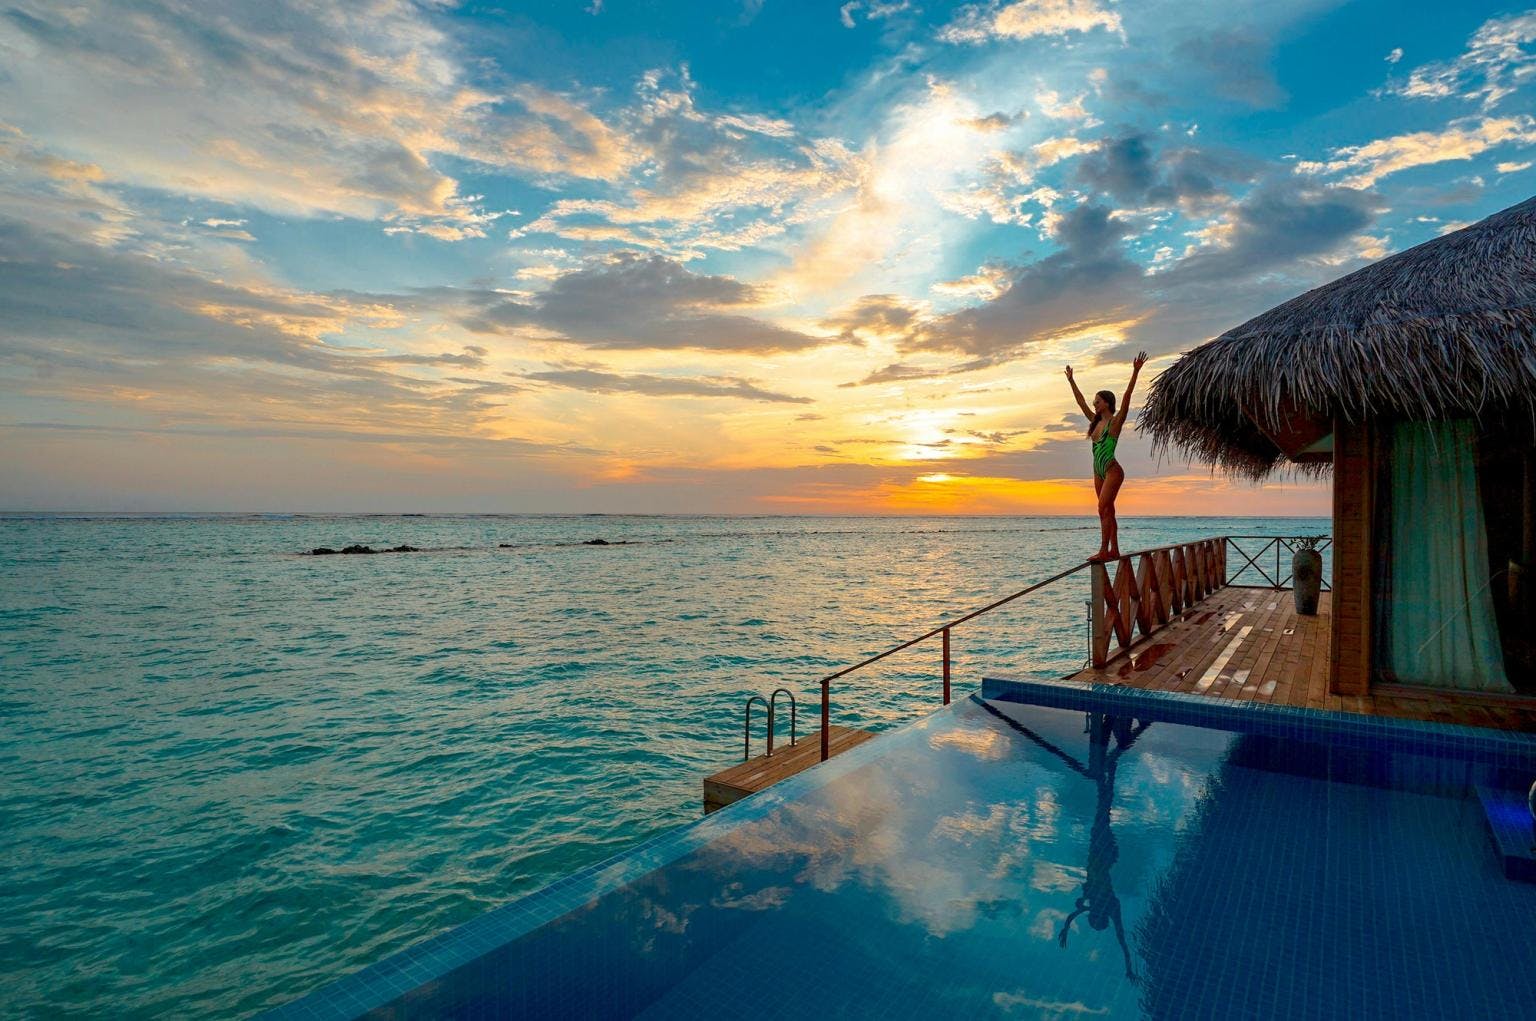 A woman walks along the side of a balcony over the ocean, next to an infinity pool